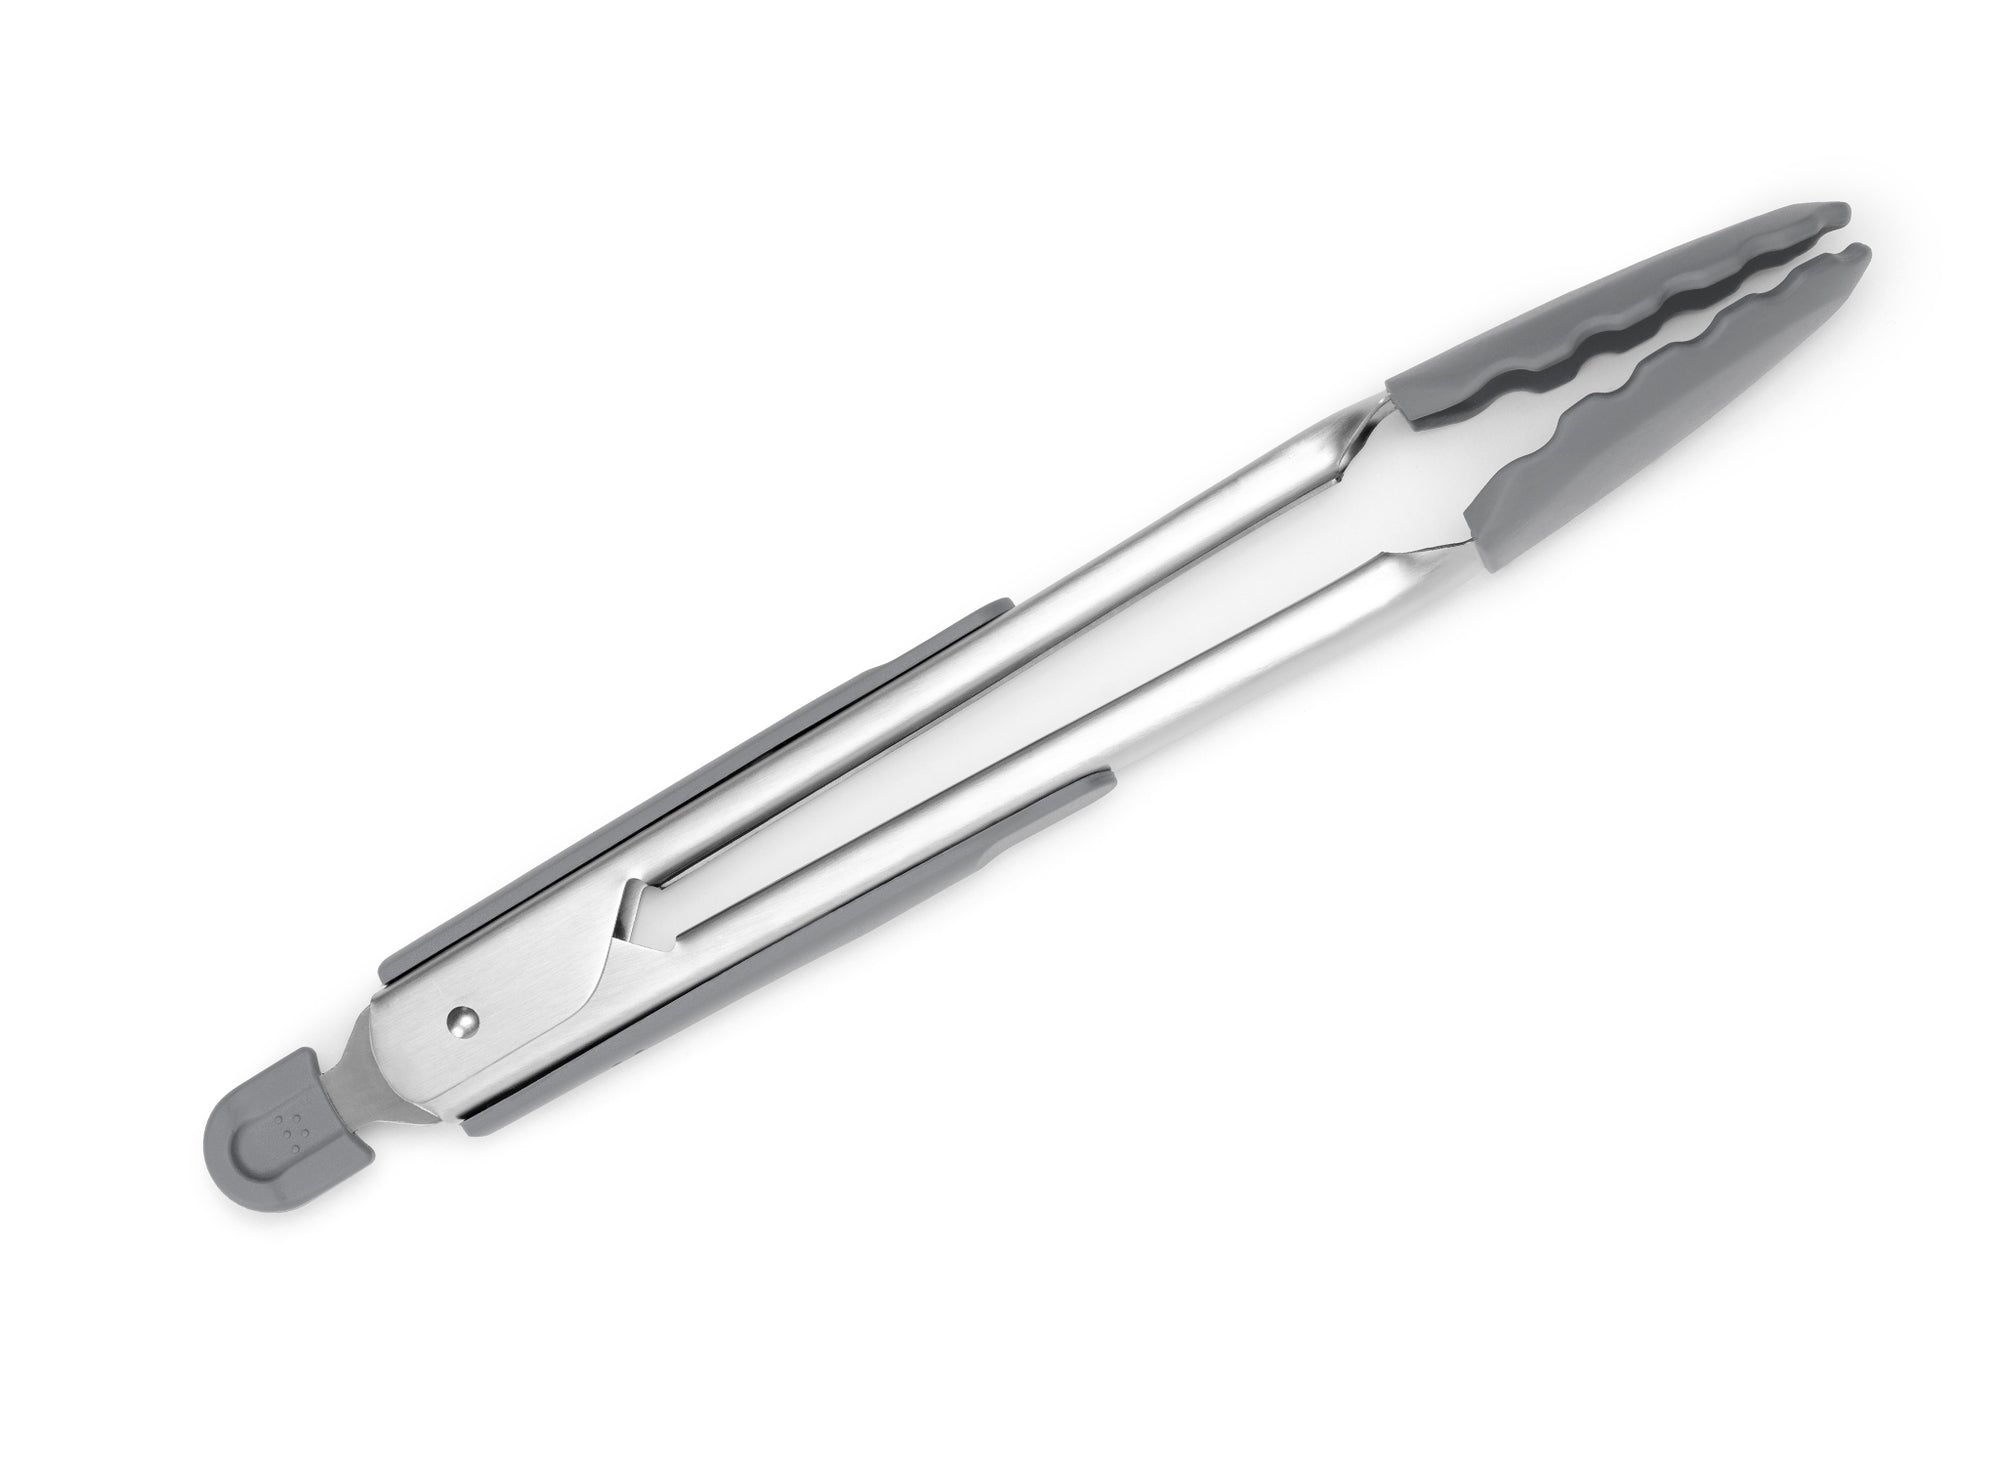 Grey Misen Silicone Tongs in a closed position, seen from the side on a seamless white background.